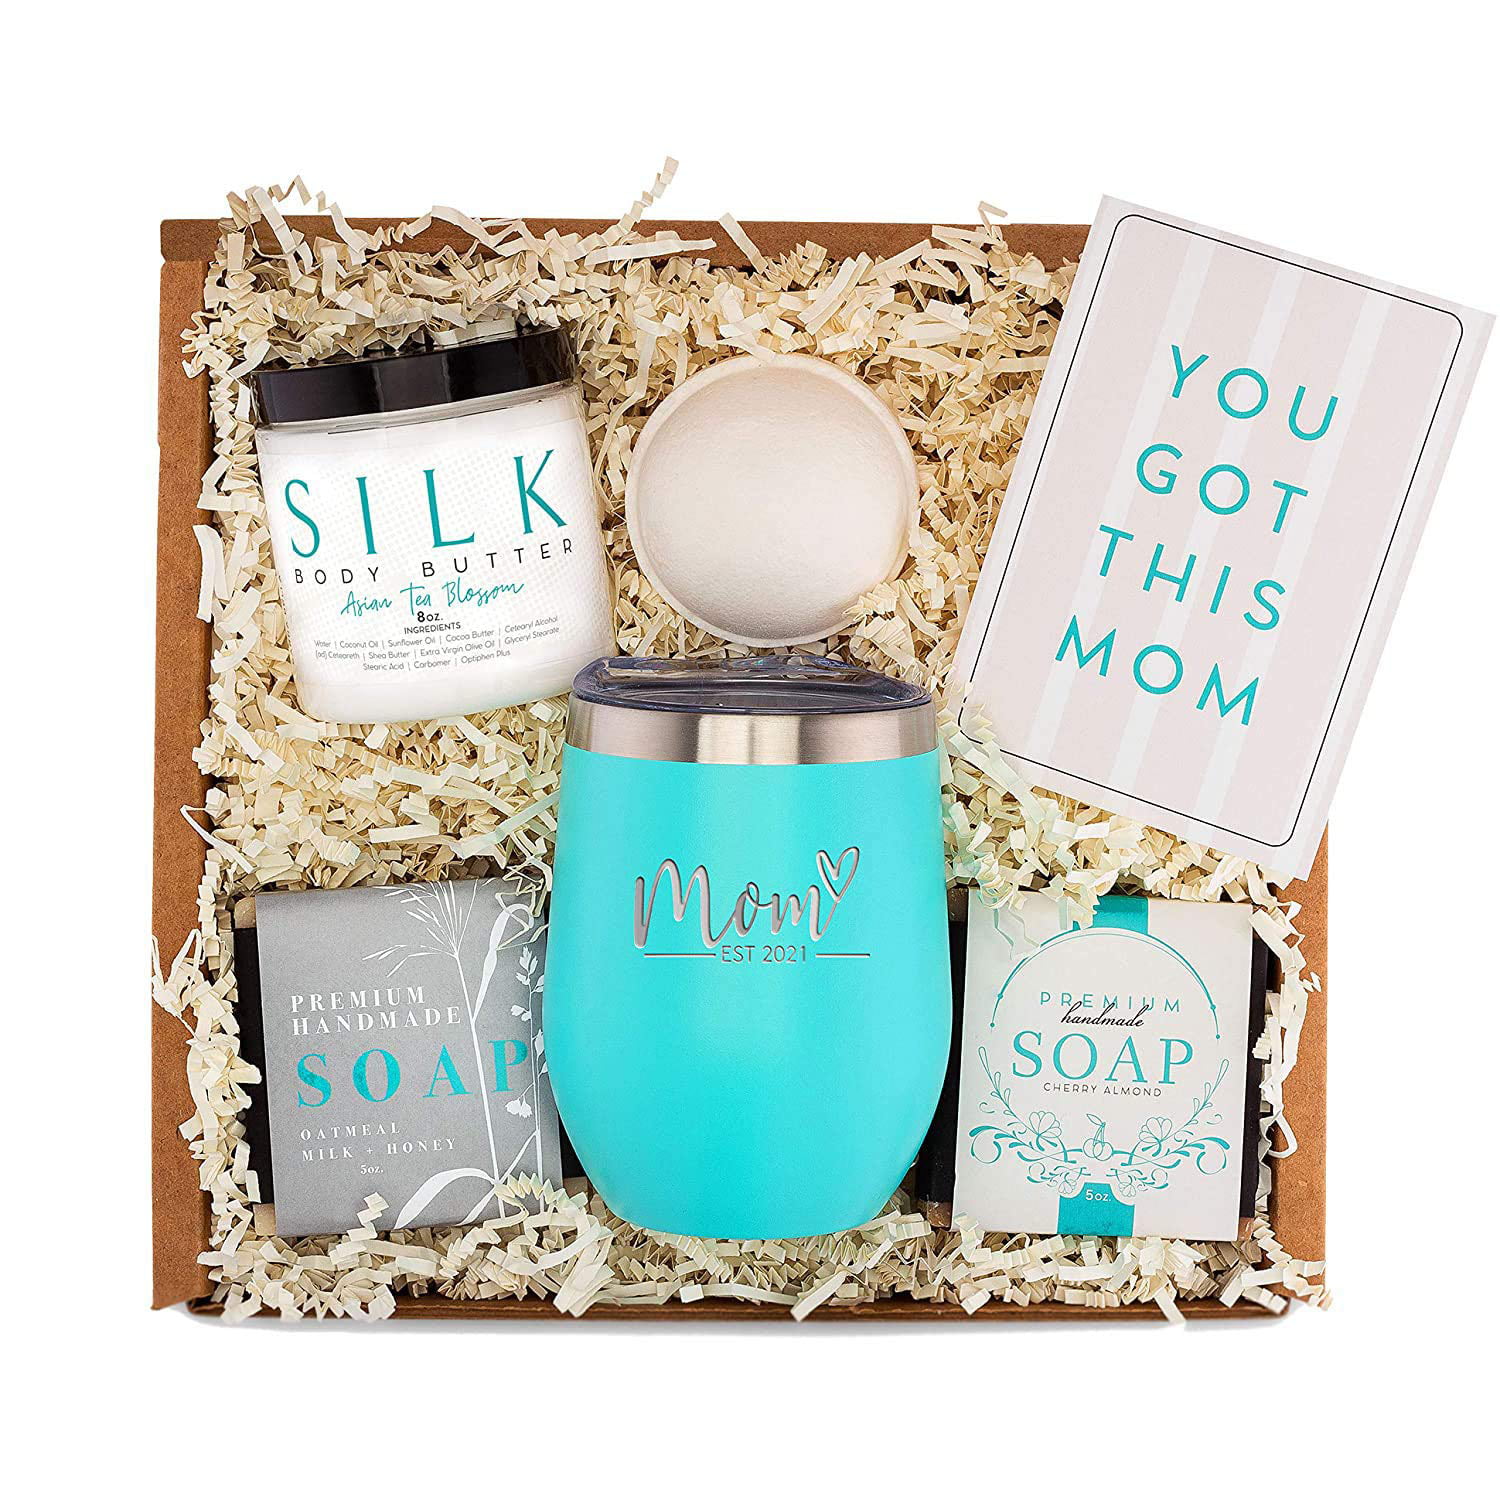 Gifts For First Mother's Day : Best Gifts for New Moms That Make a First Mother's Day ... : However, first mother's day gifts can be unforgettable if you play your cards right.